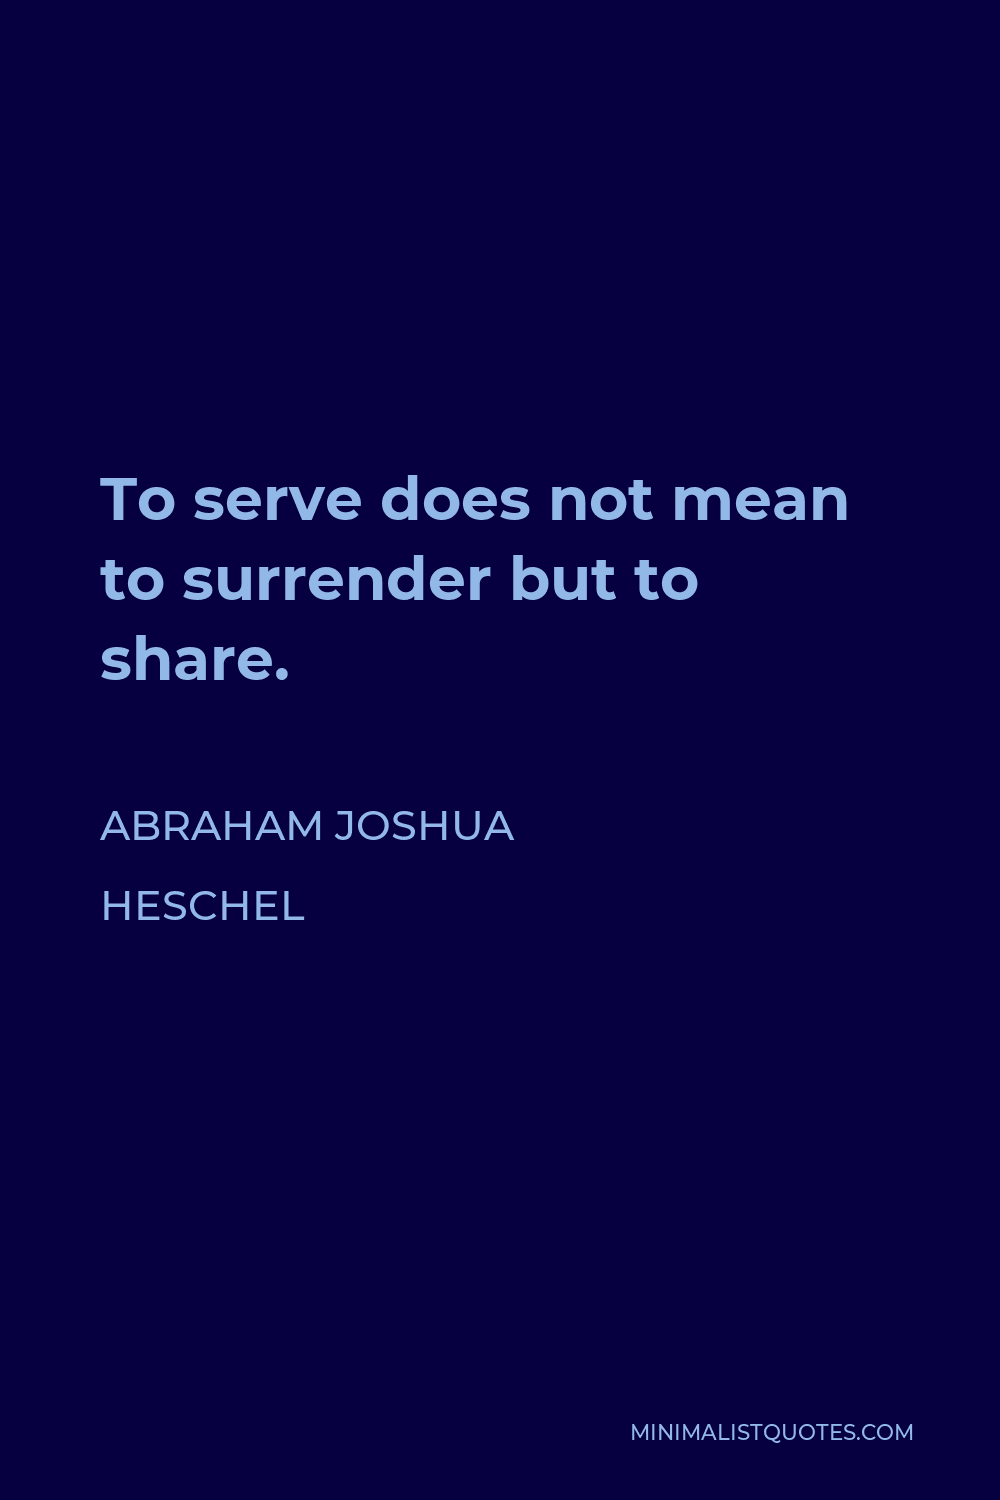 Abraham Joshua Heschel Quote - To serve does not mean to surrender but to share.